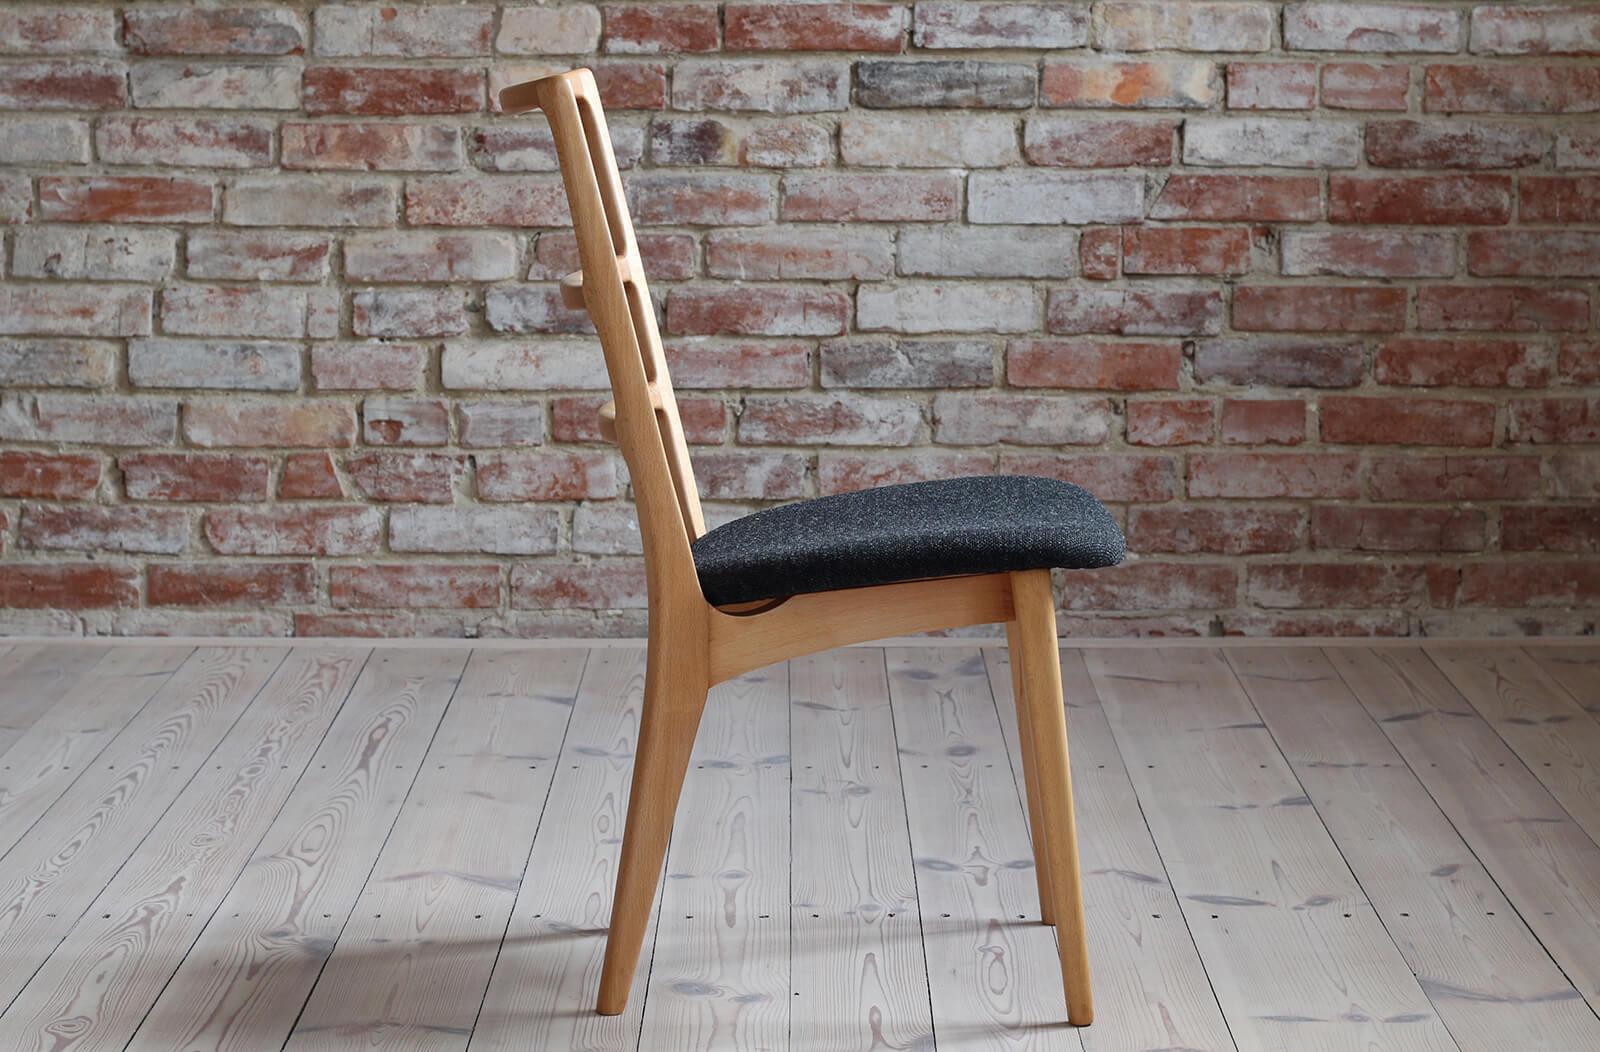 Polish Set of 6 Dining Chairs by Marian Grabiński, Midcentury, Reupholstered in Kvadrat